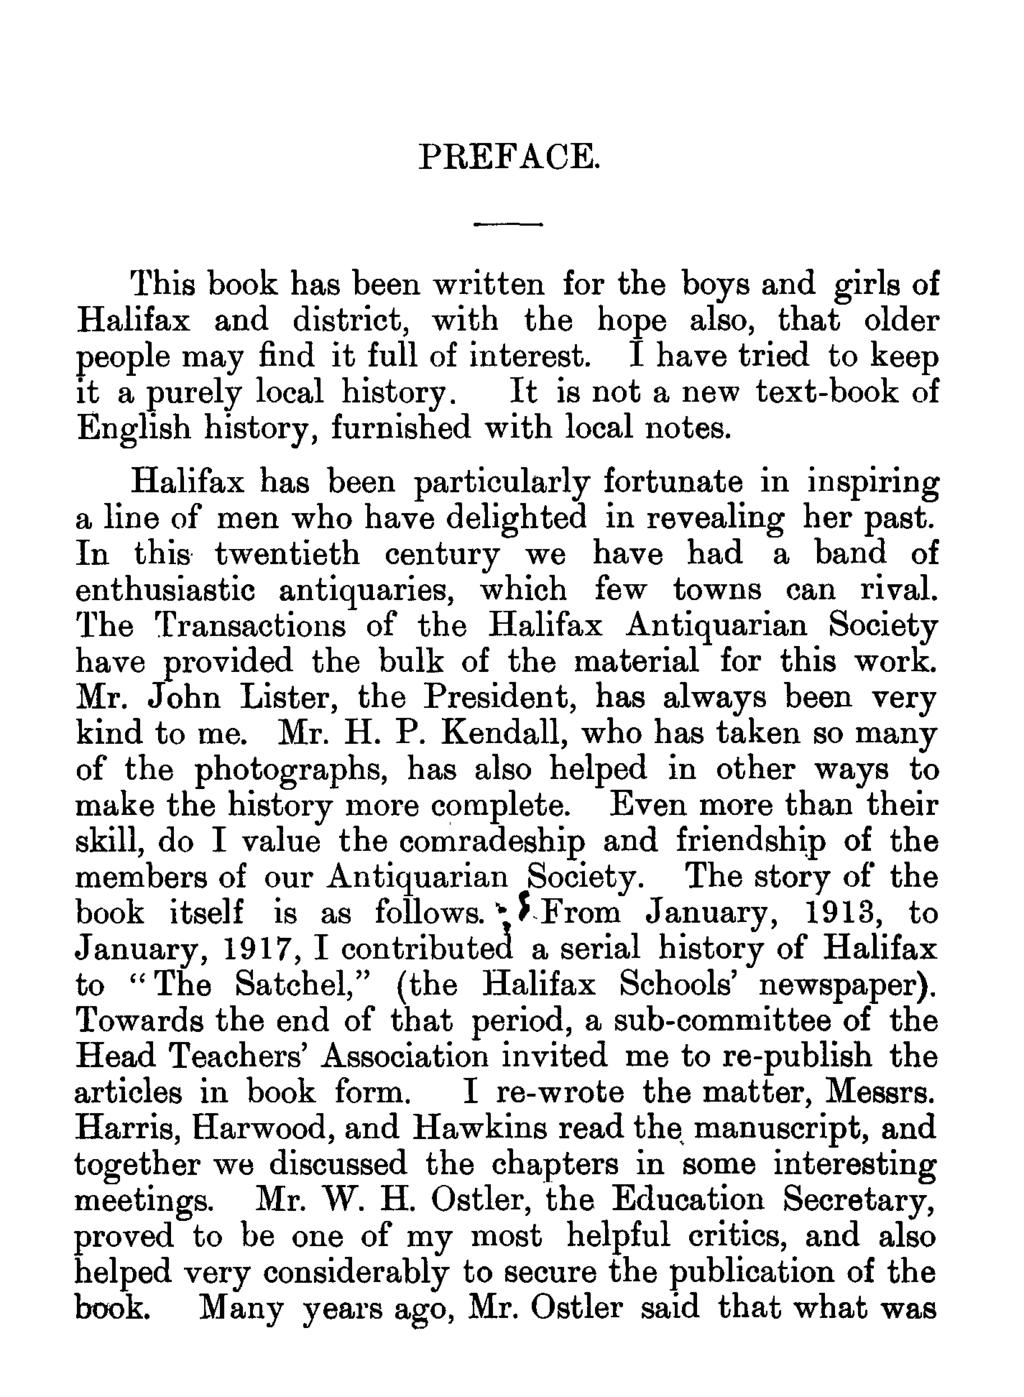 PREFACE. This book has been written for the boys and girls of Halifax and district, with the hope also, that older people may find it full of interest. I have tried to keep it a purely local history.